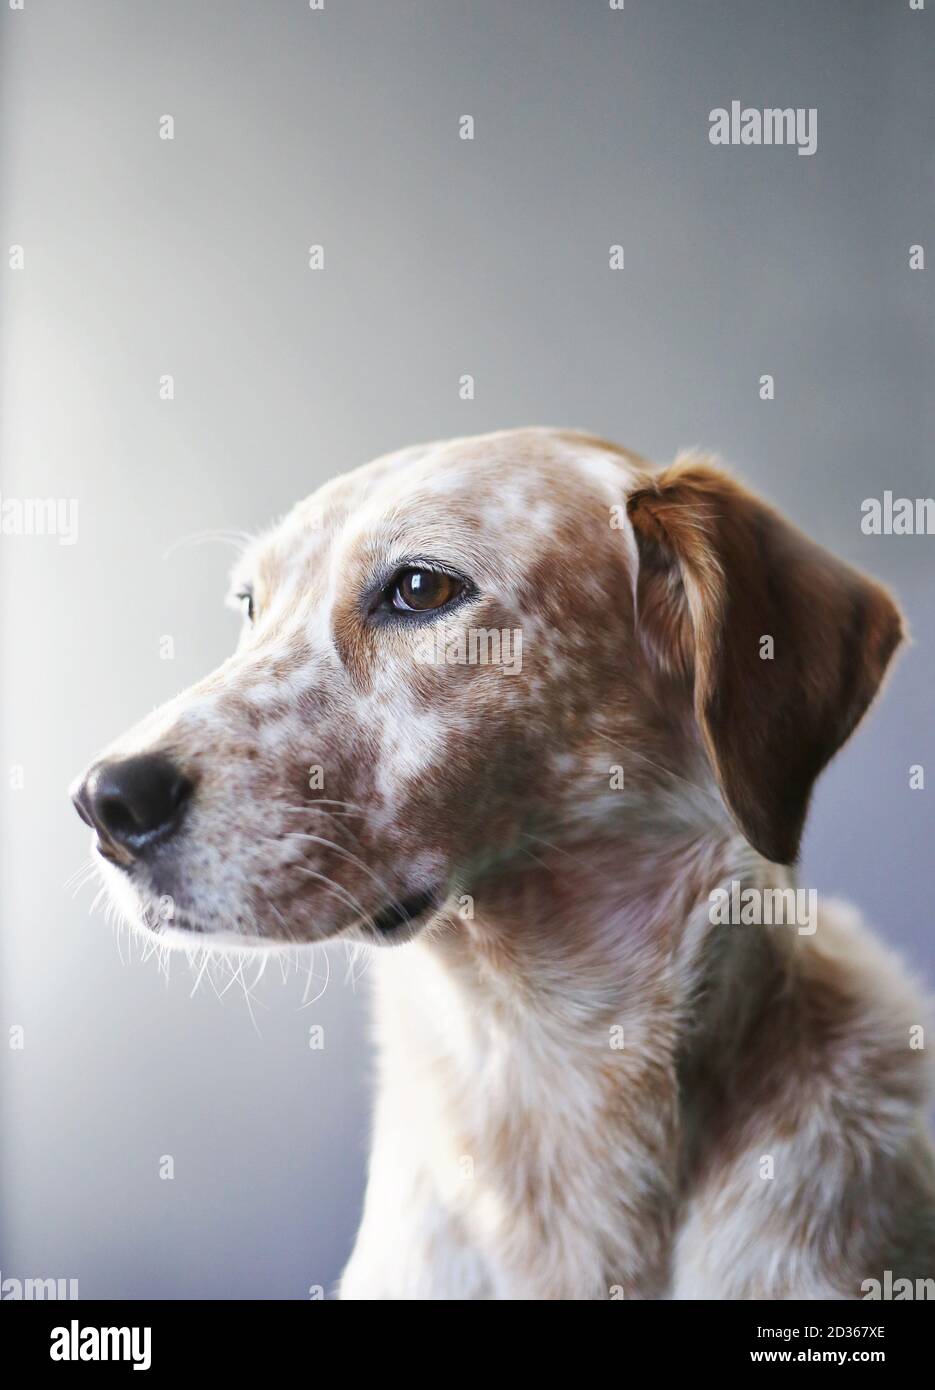 Portrait of a speckled dog. Stock Photo